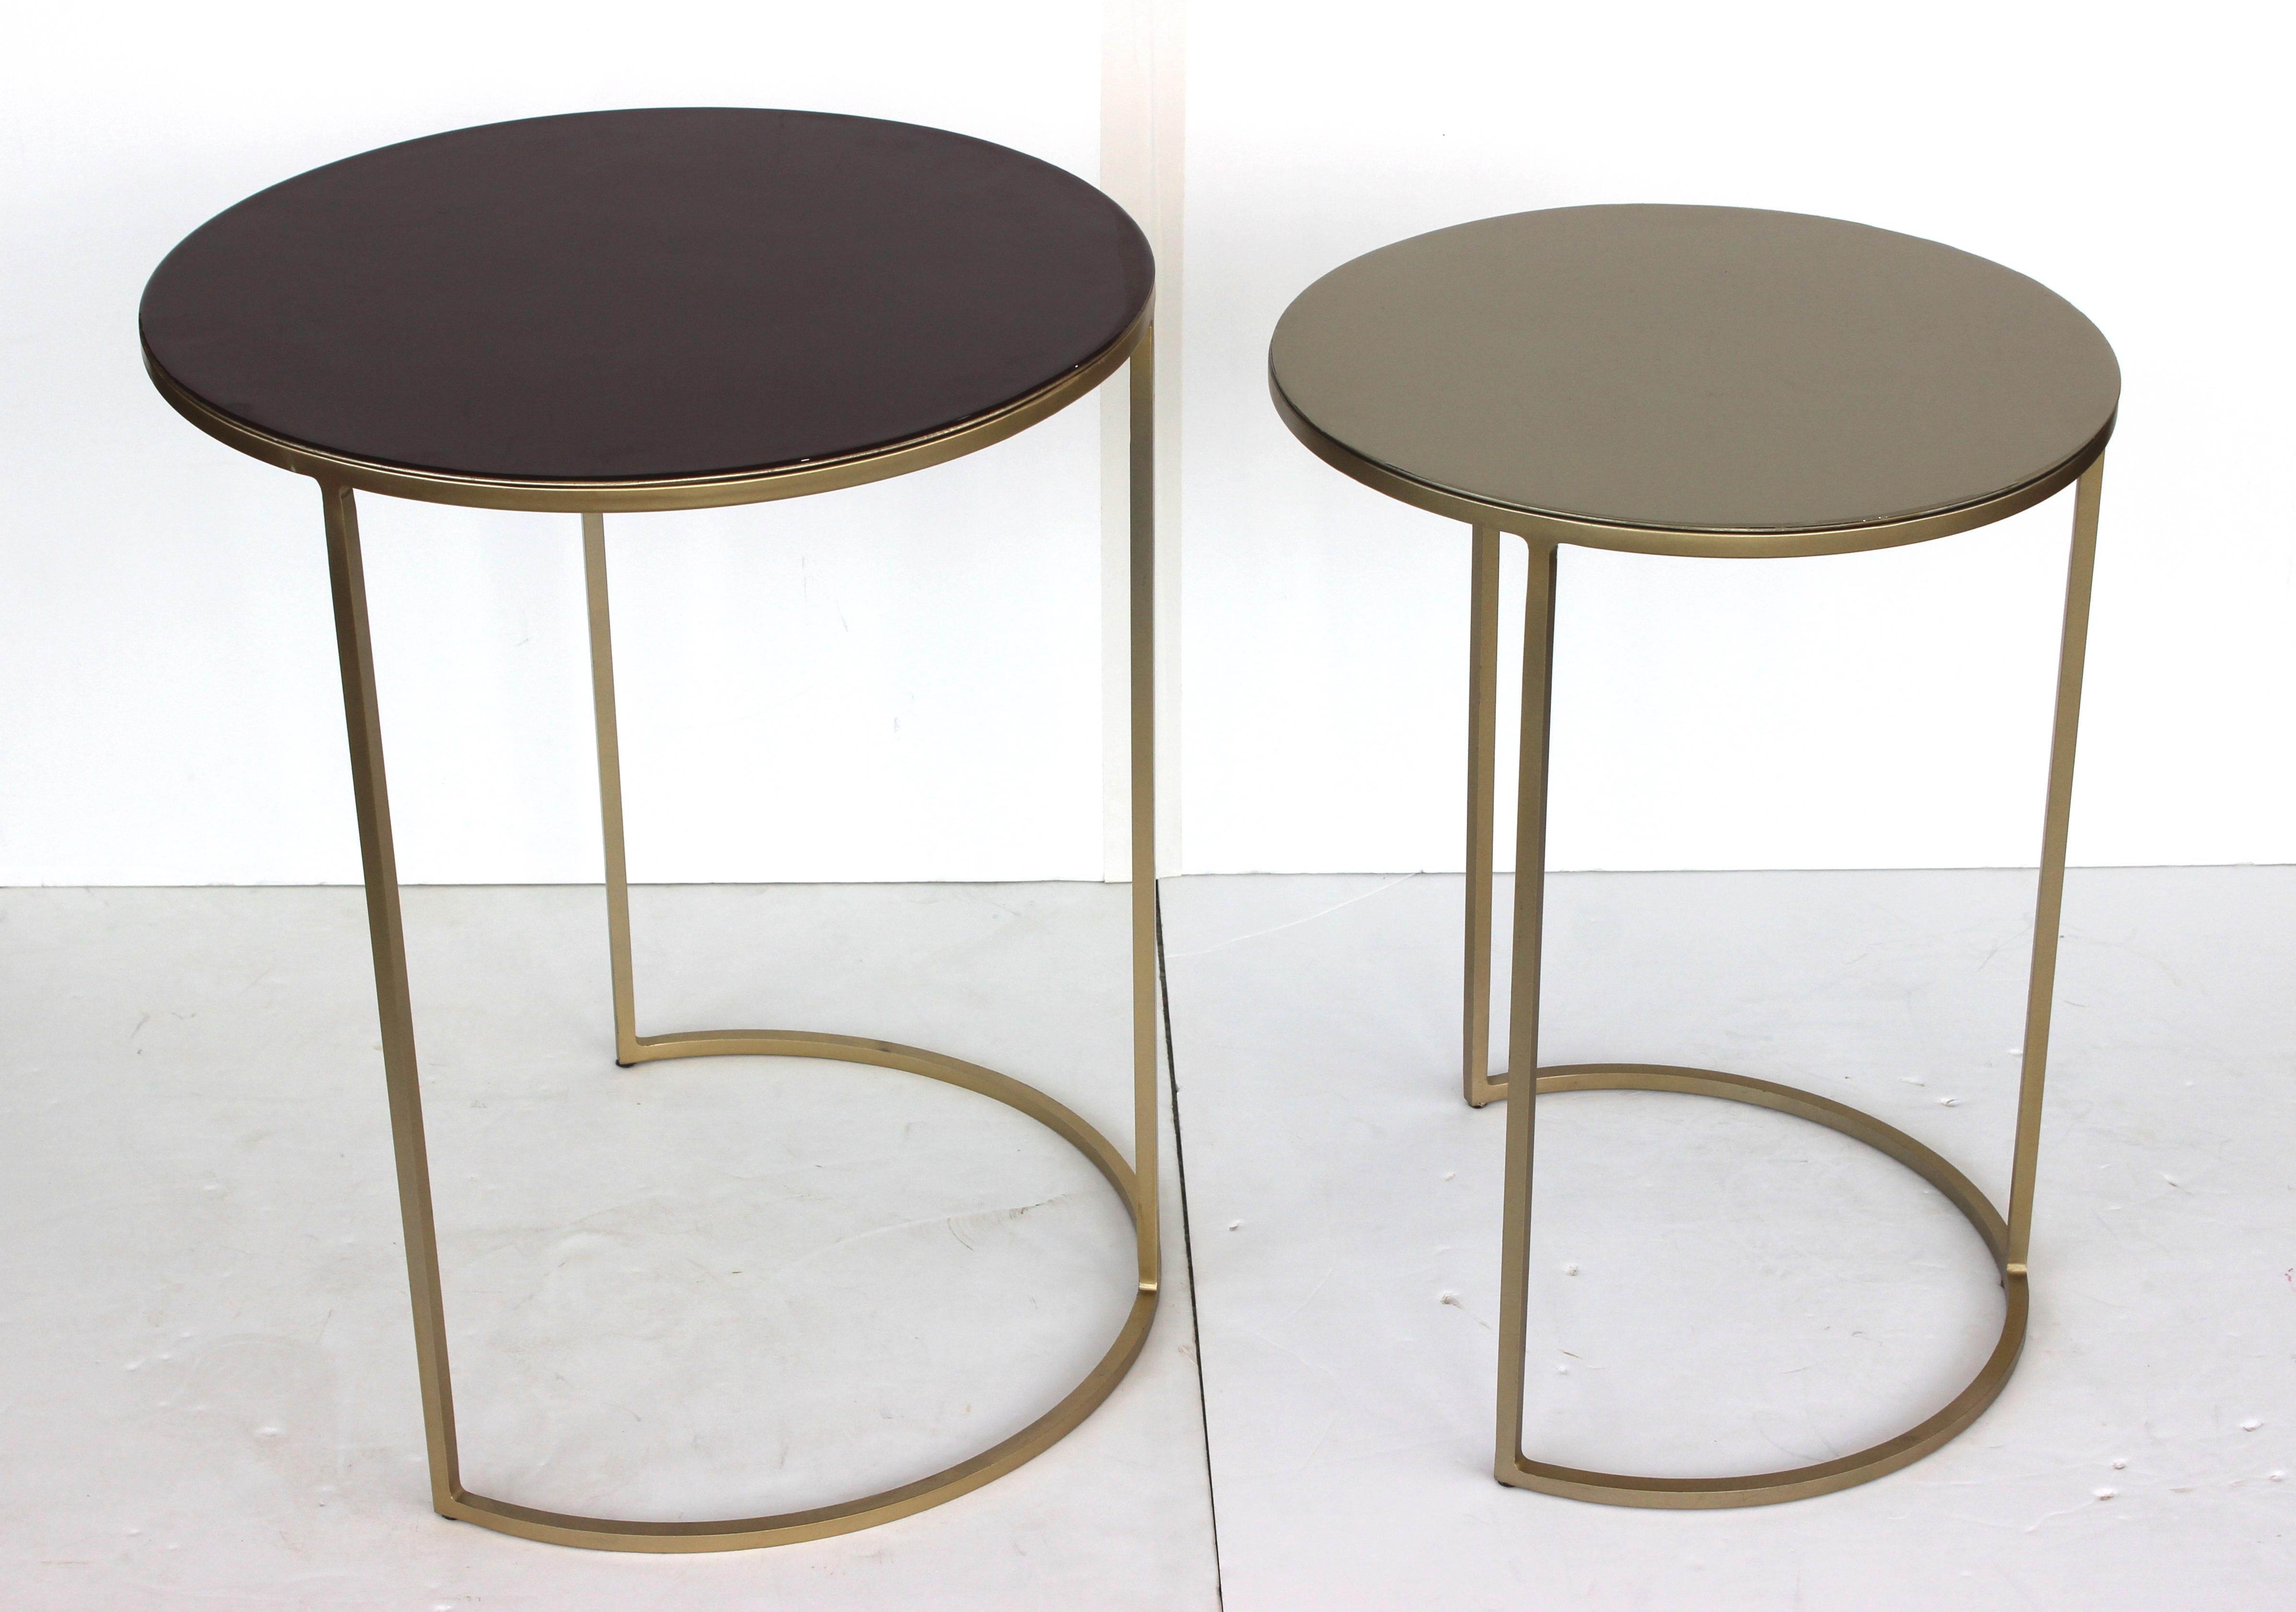 Two Piece Nesting Tables with Lacquered Tops In Good Condition For Sale In West Palm Beach, FL